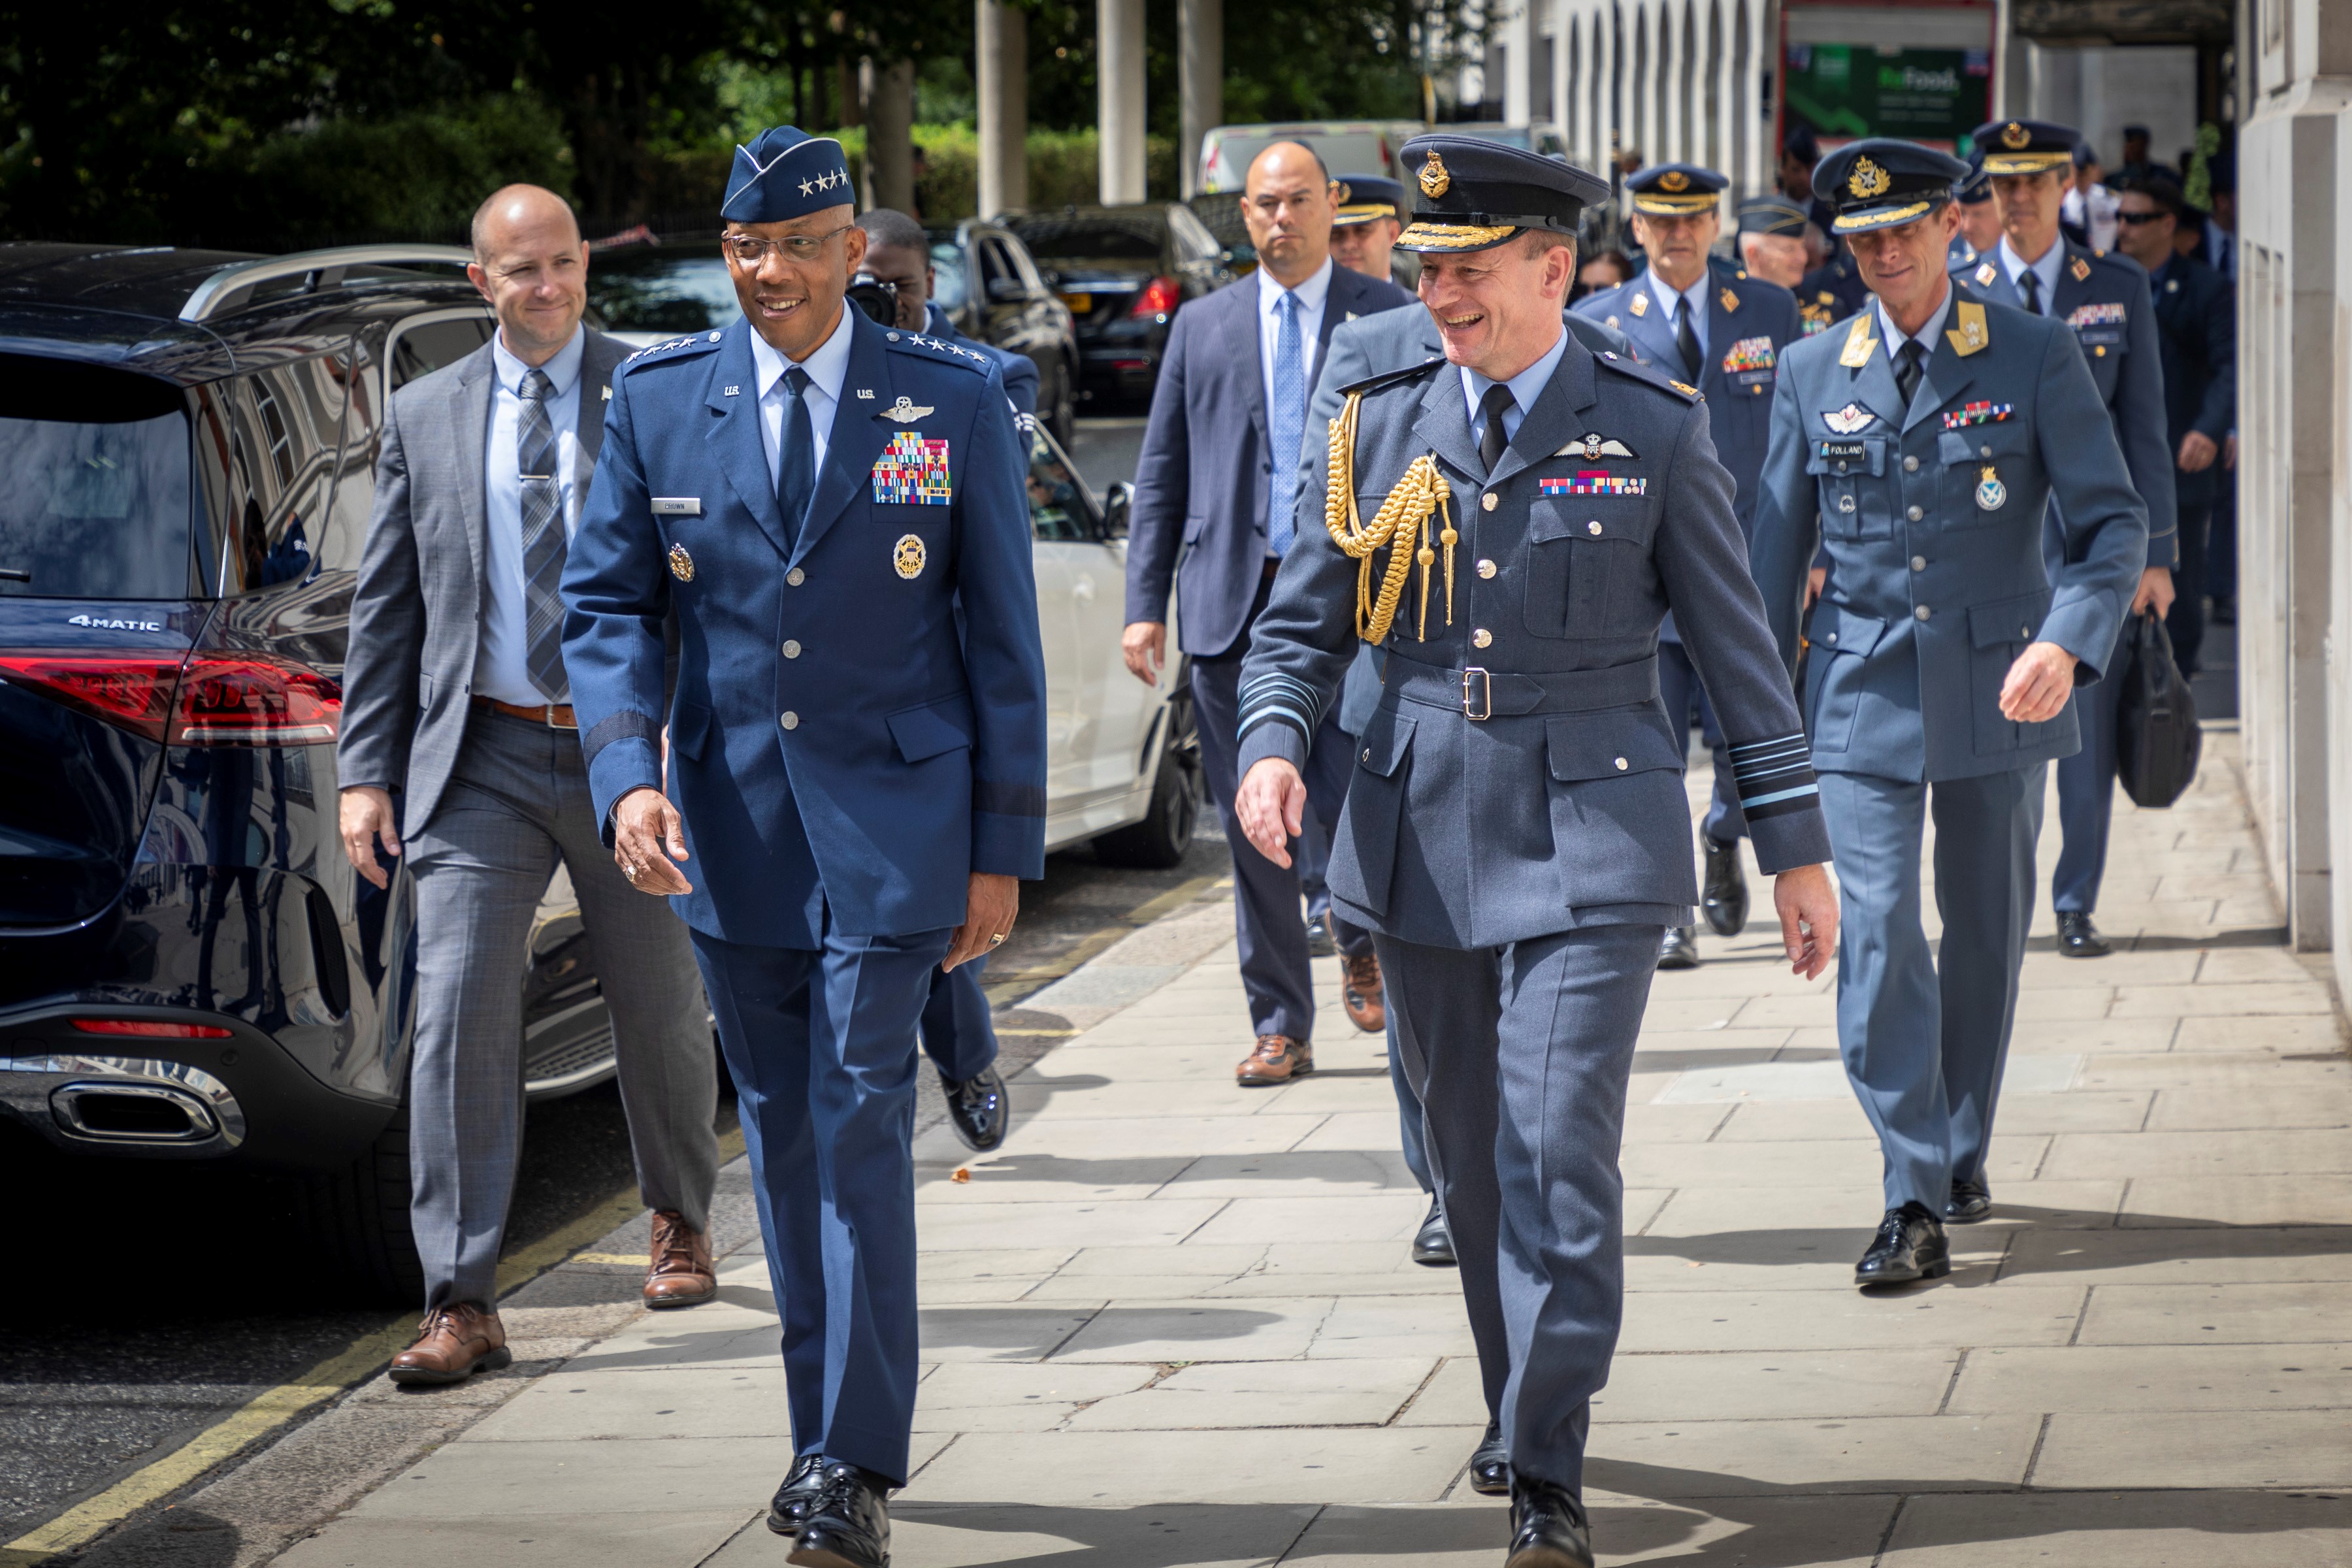 Image shows the Chief of the Air Staff walking in the streets with other aviators.